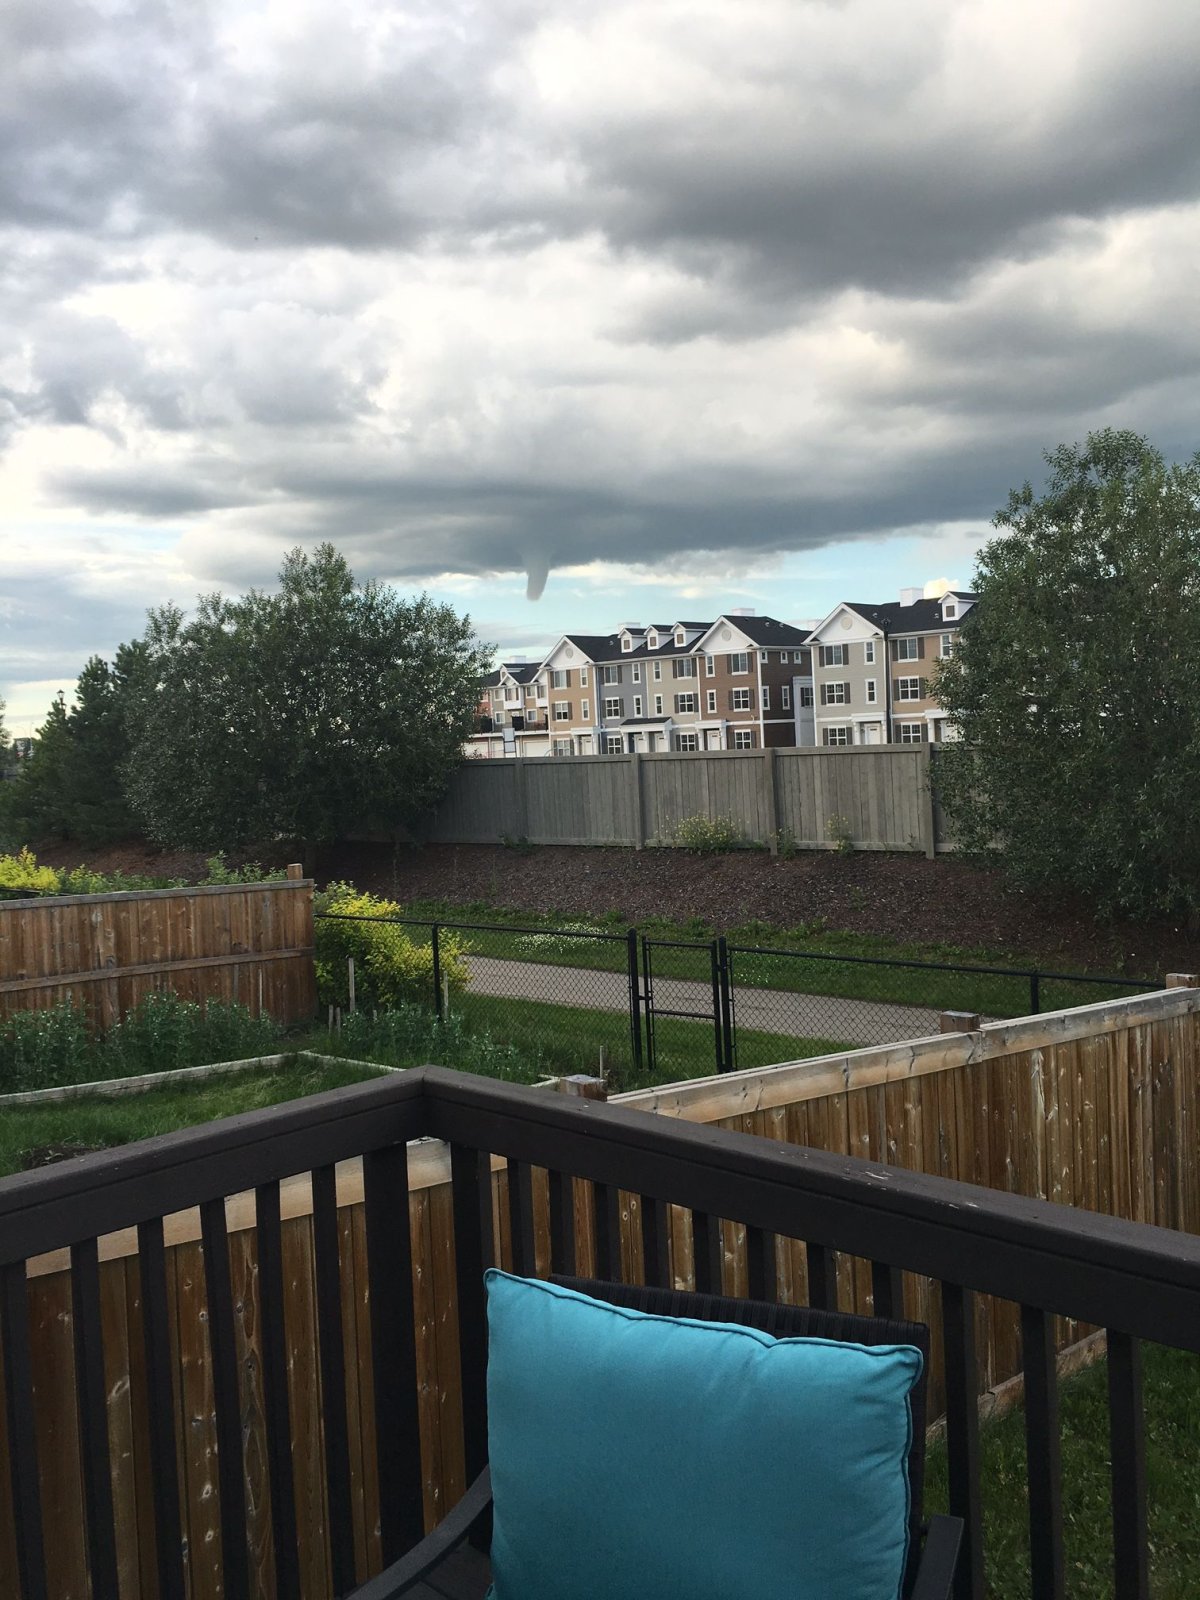 PHOTOS: Funnel clouds spotted in Edmonton area Thursday night - image